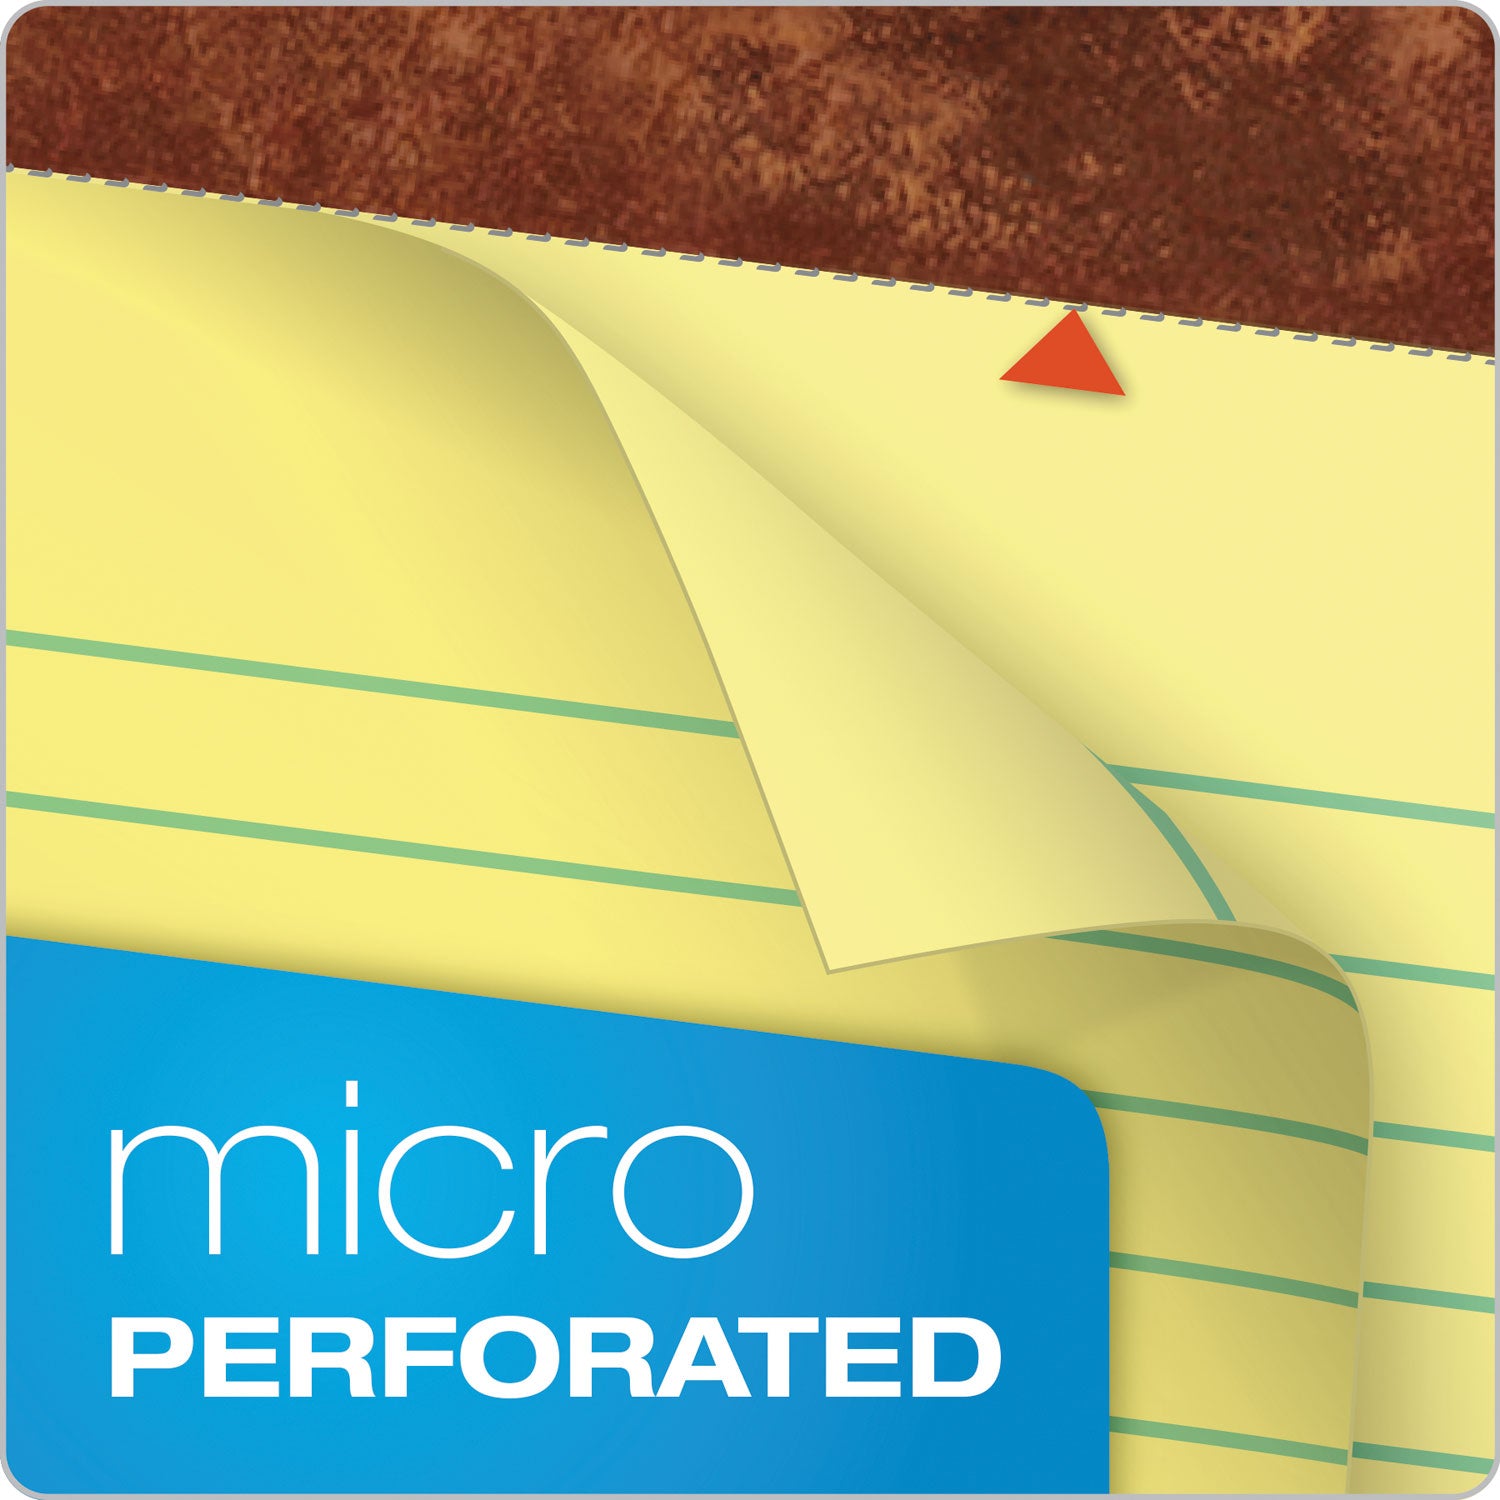 The Legal Pad" Ruled Perforated Pads, Narrow Rule, 50 Canary-Yellow 5 x 8 Sheets, Dozen - 